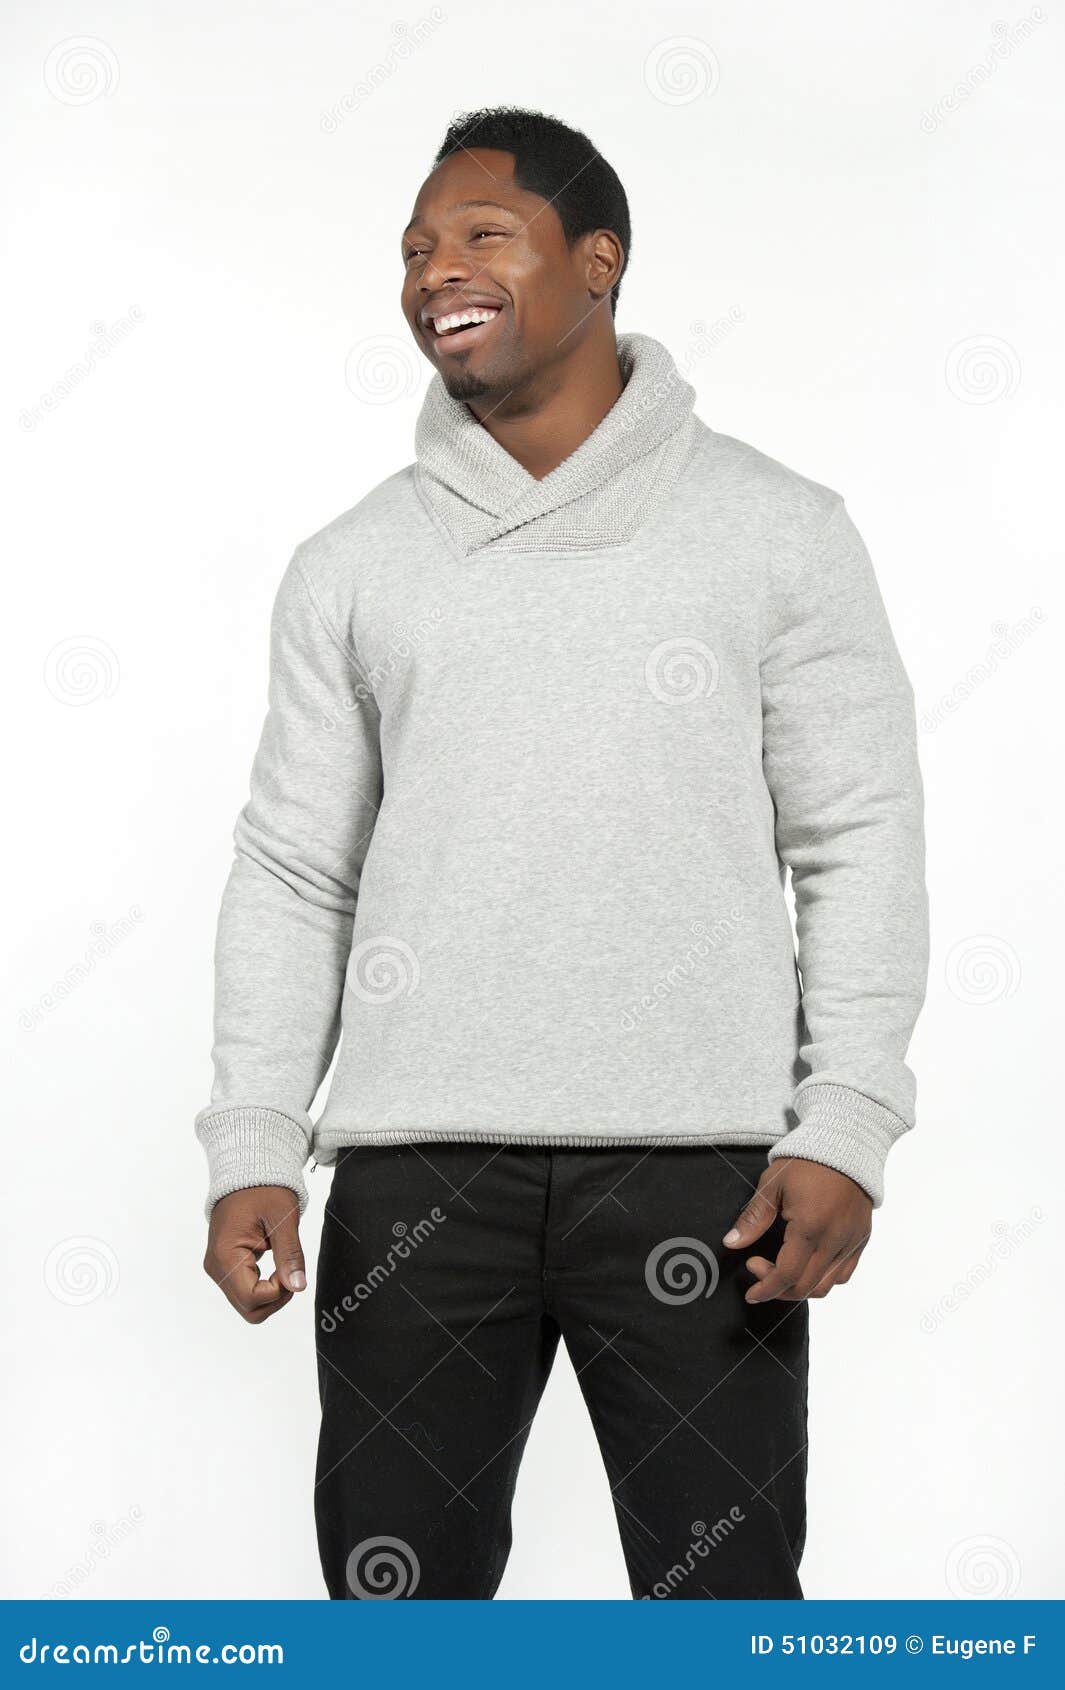 African American Male in Gray Sweater Stock Image - Image of slick ...